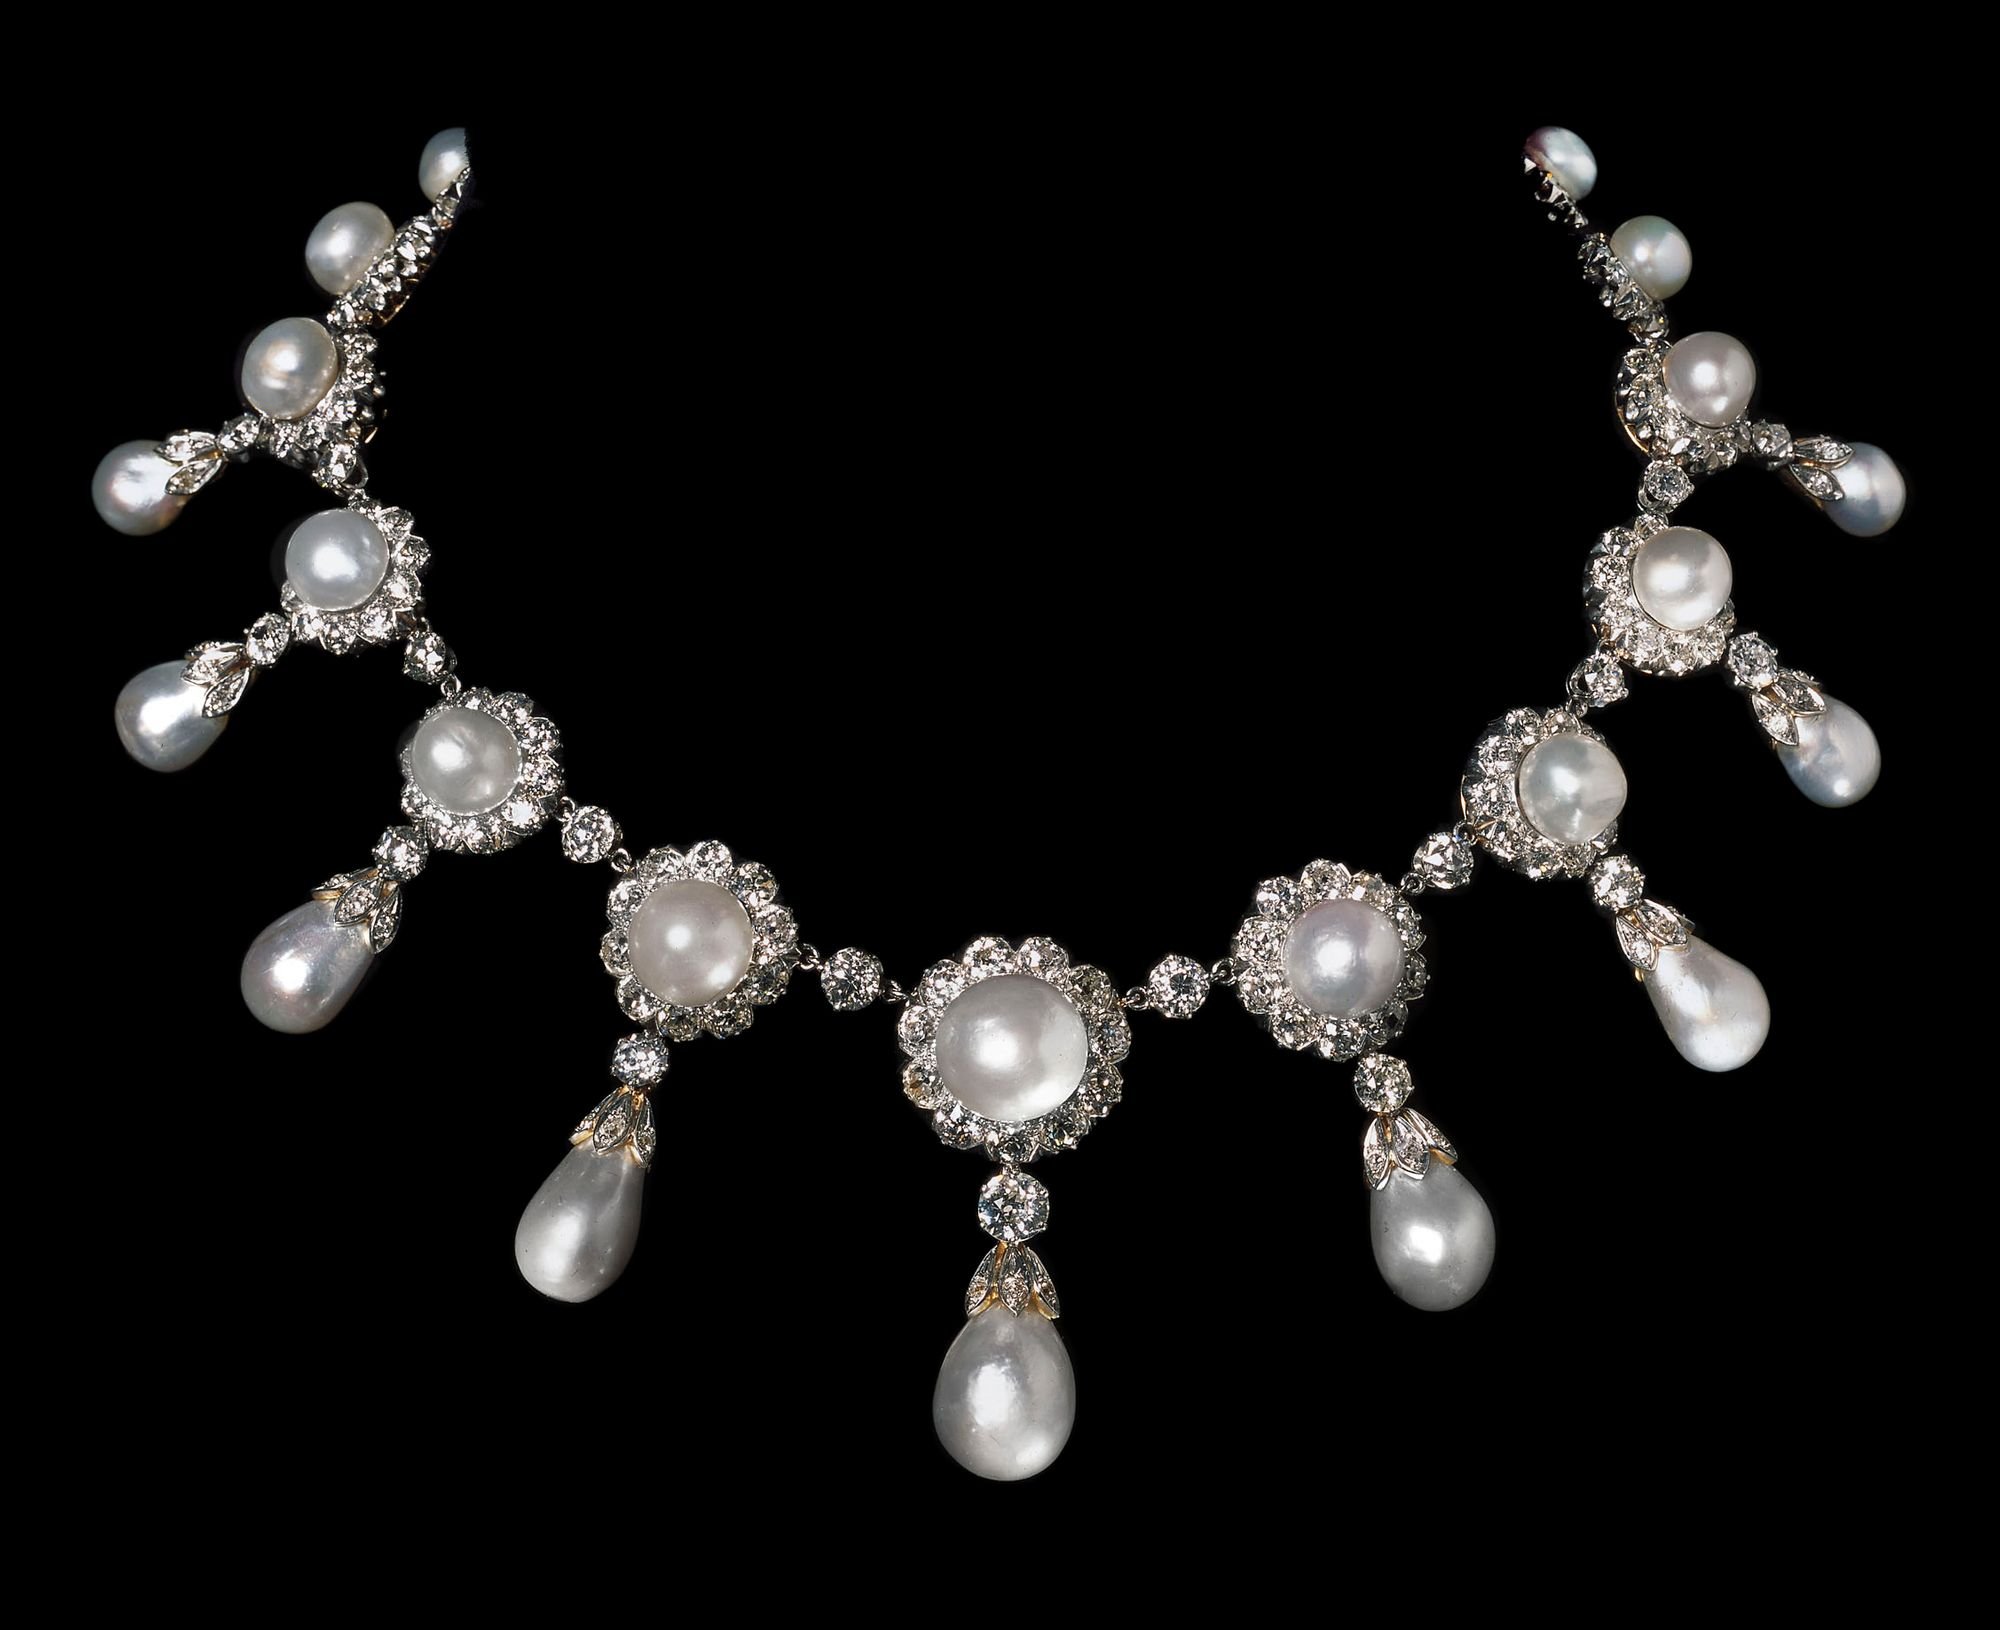 Set of natural pearl dress studs, circa 1893 and two tie pins, late 19th  century, Vienna 1900: An Imperial and Royal Collection, 2023